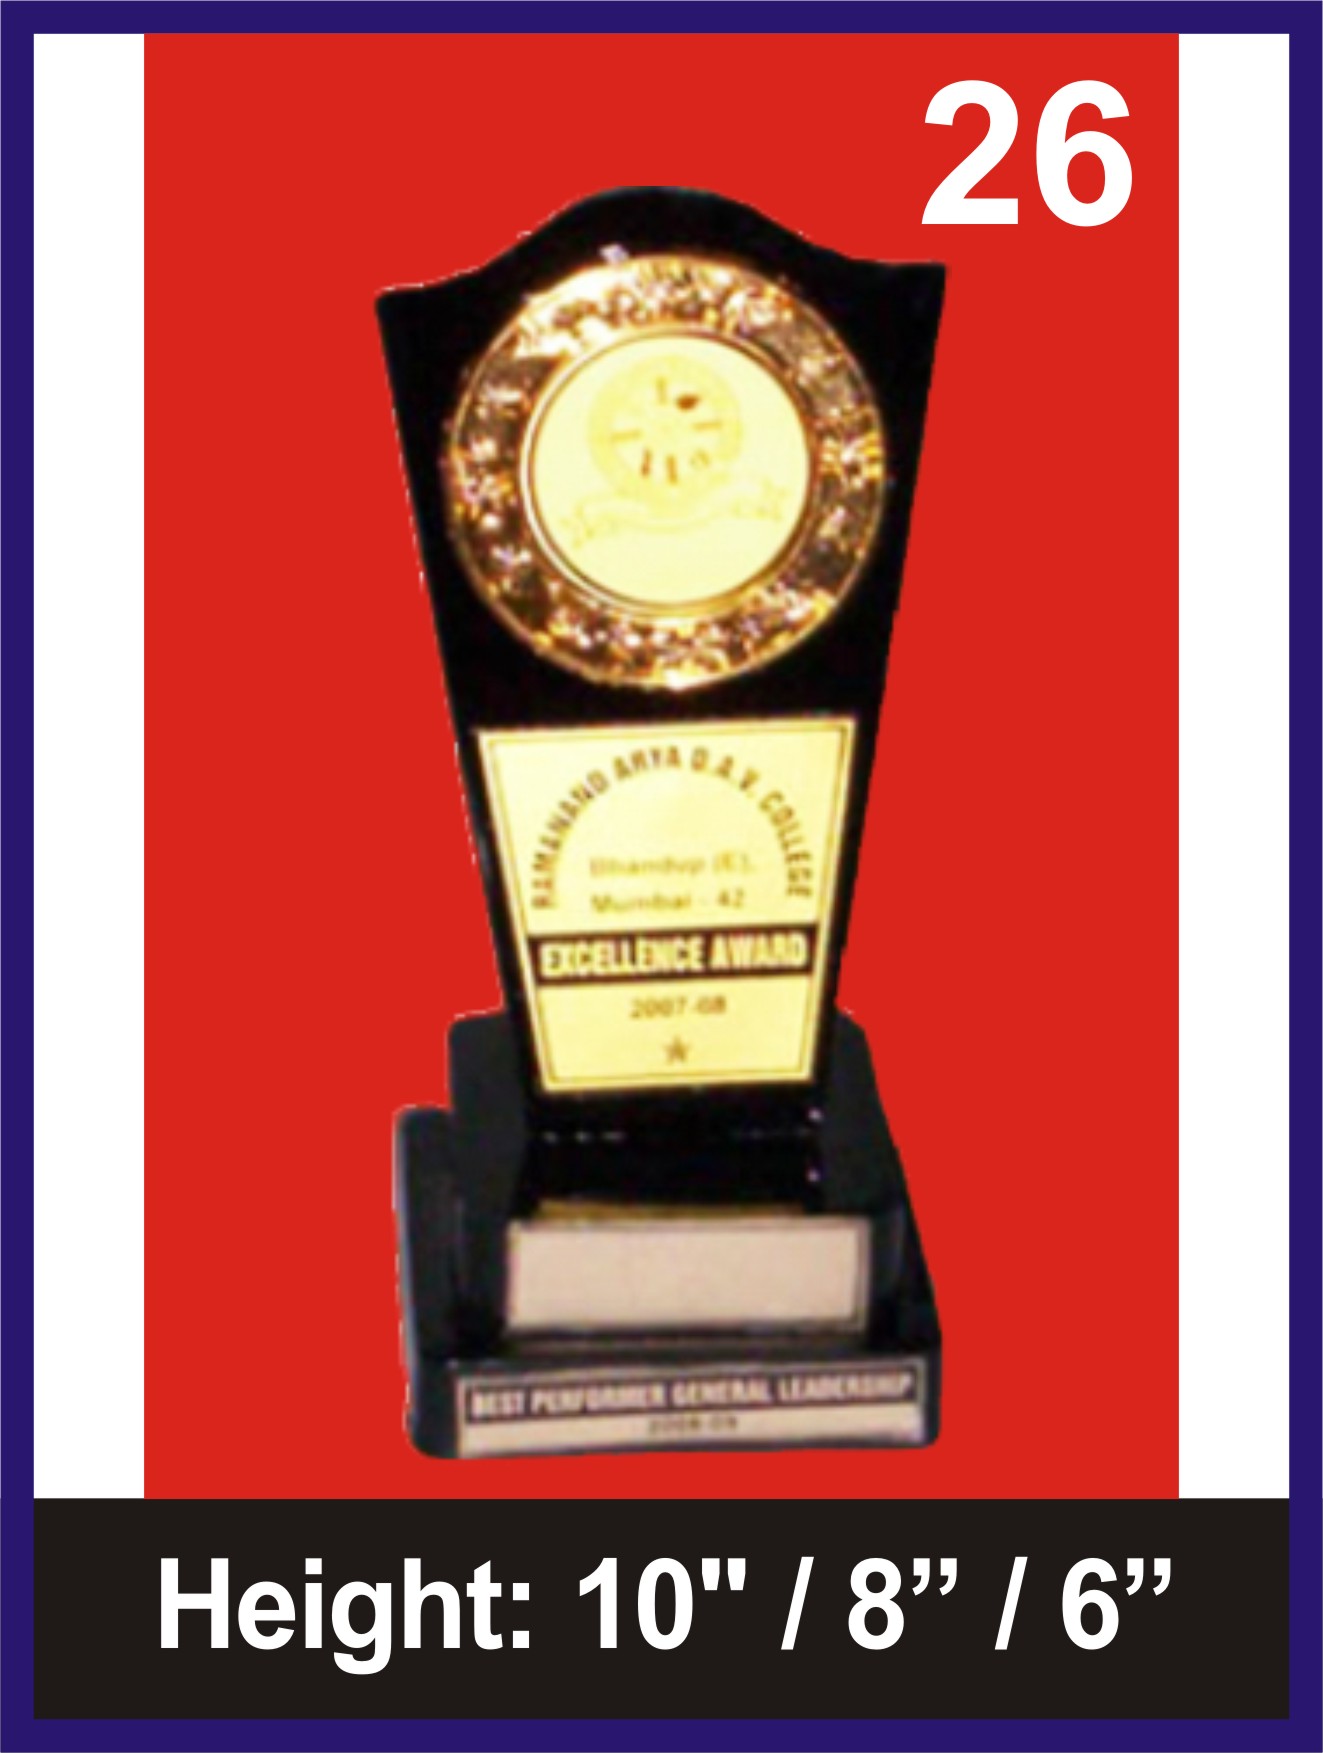 Manufacturers of ACRYLIC TROPHIES in Mumbai